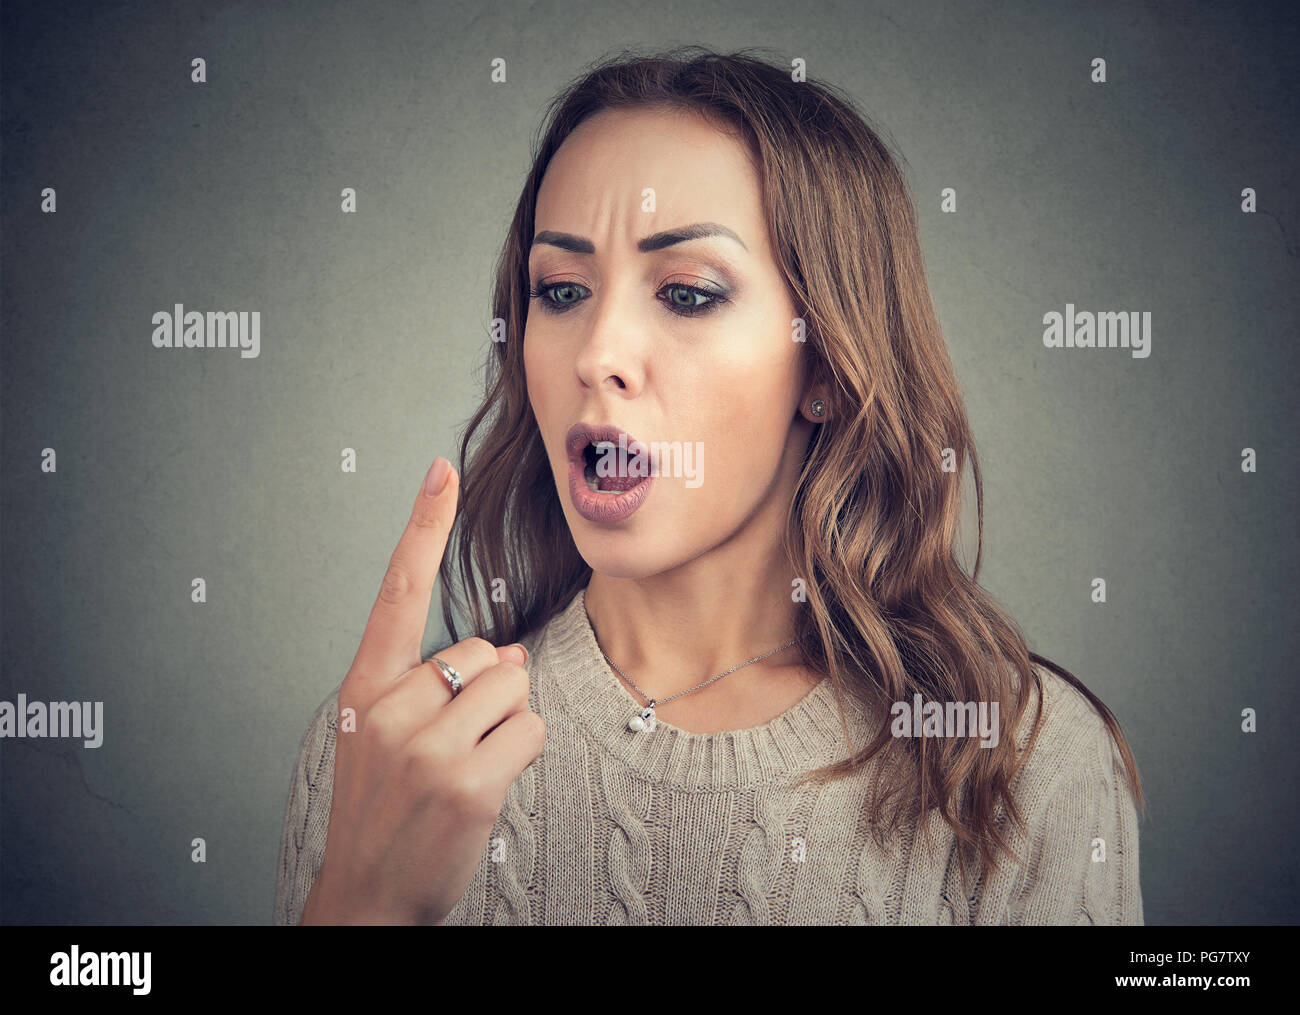 Shocked funny woman looking at her finger has double vision Stock Photo